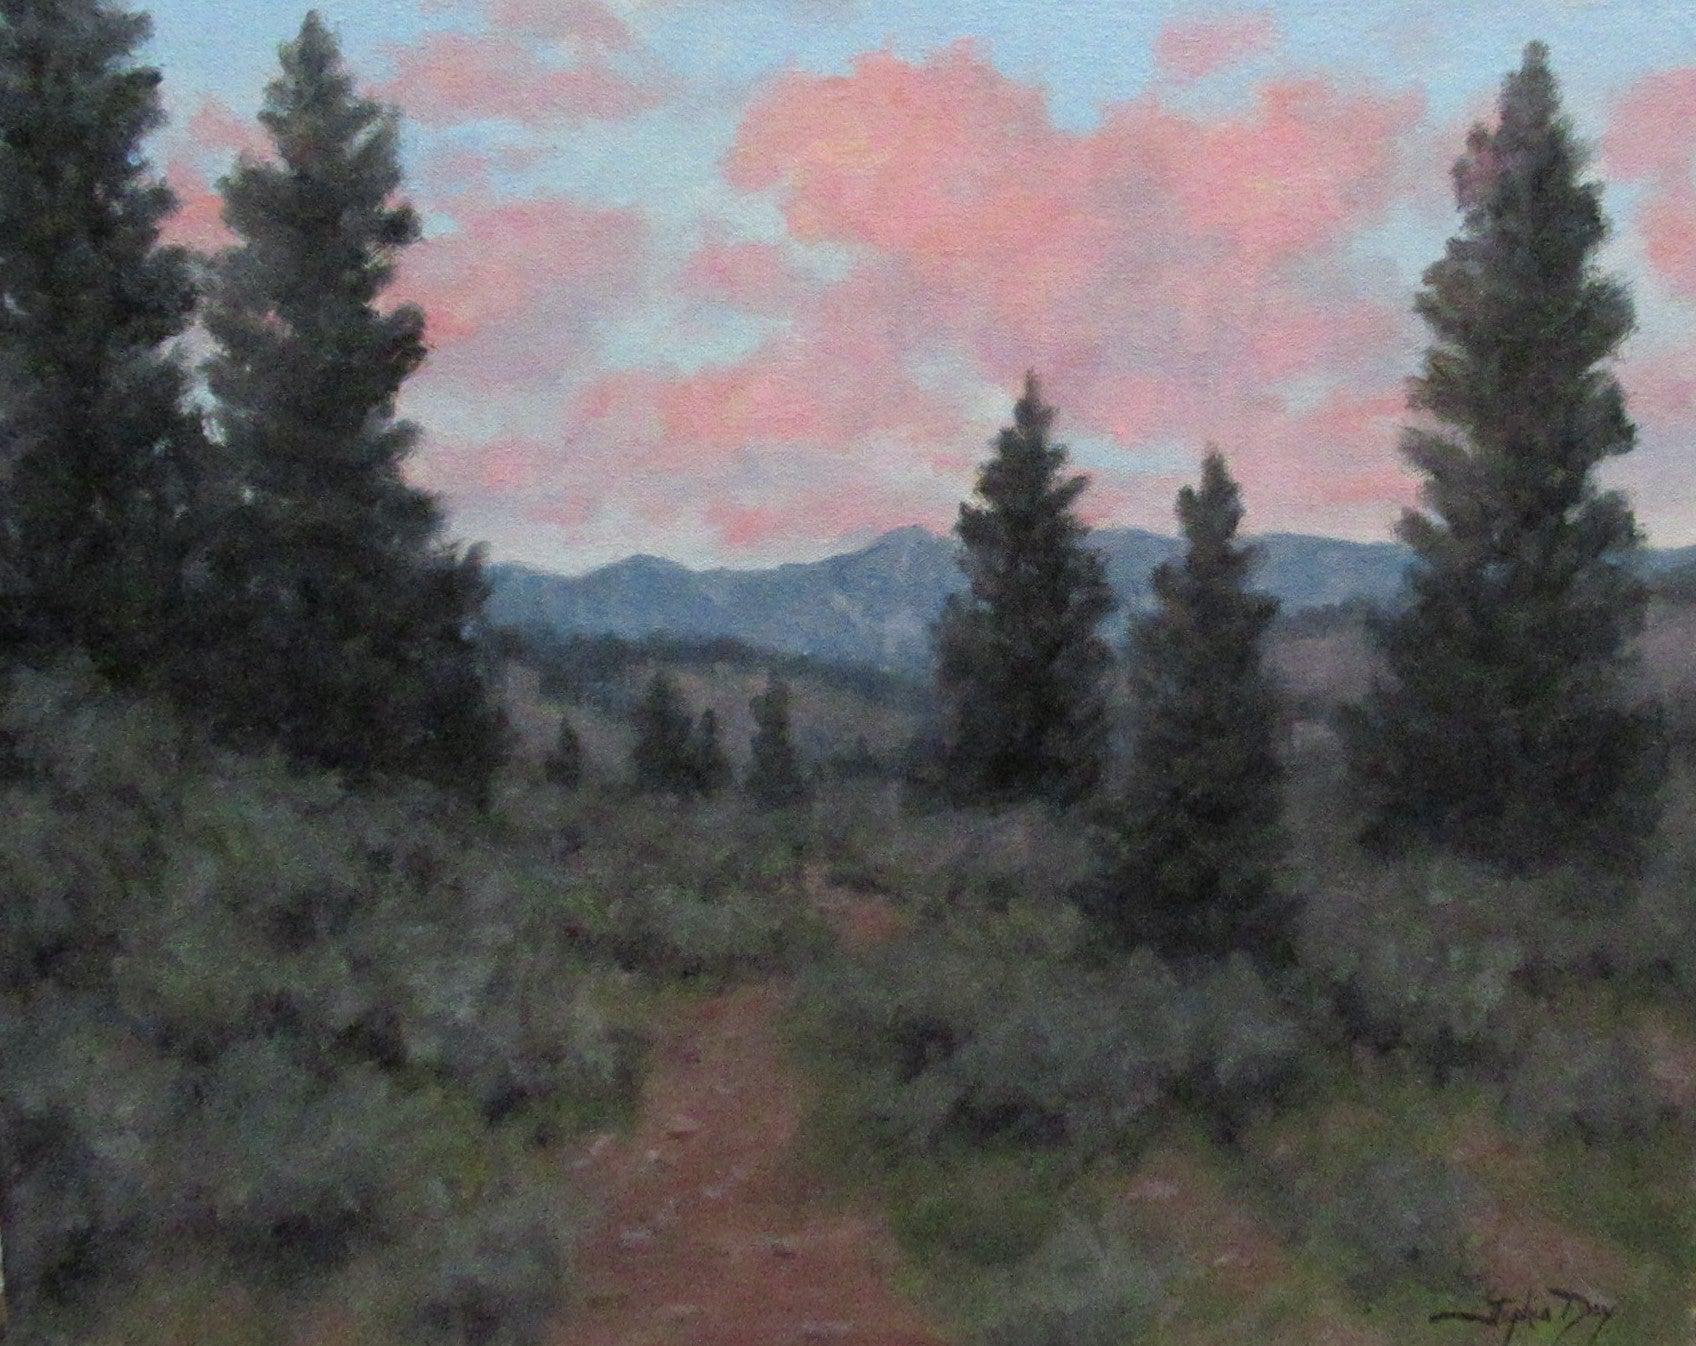 Mountain Morning Clouds-Painting-Stephen Day-Sorrel Sky Gallery